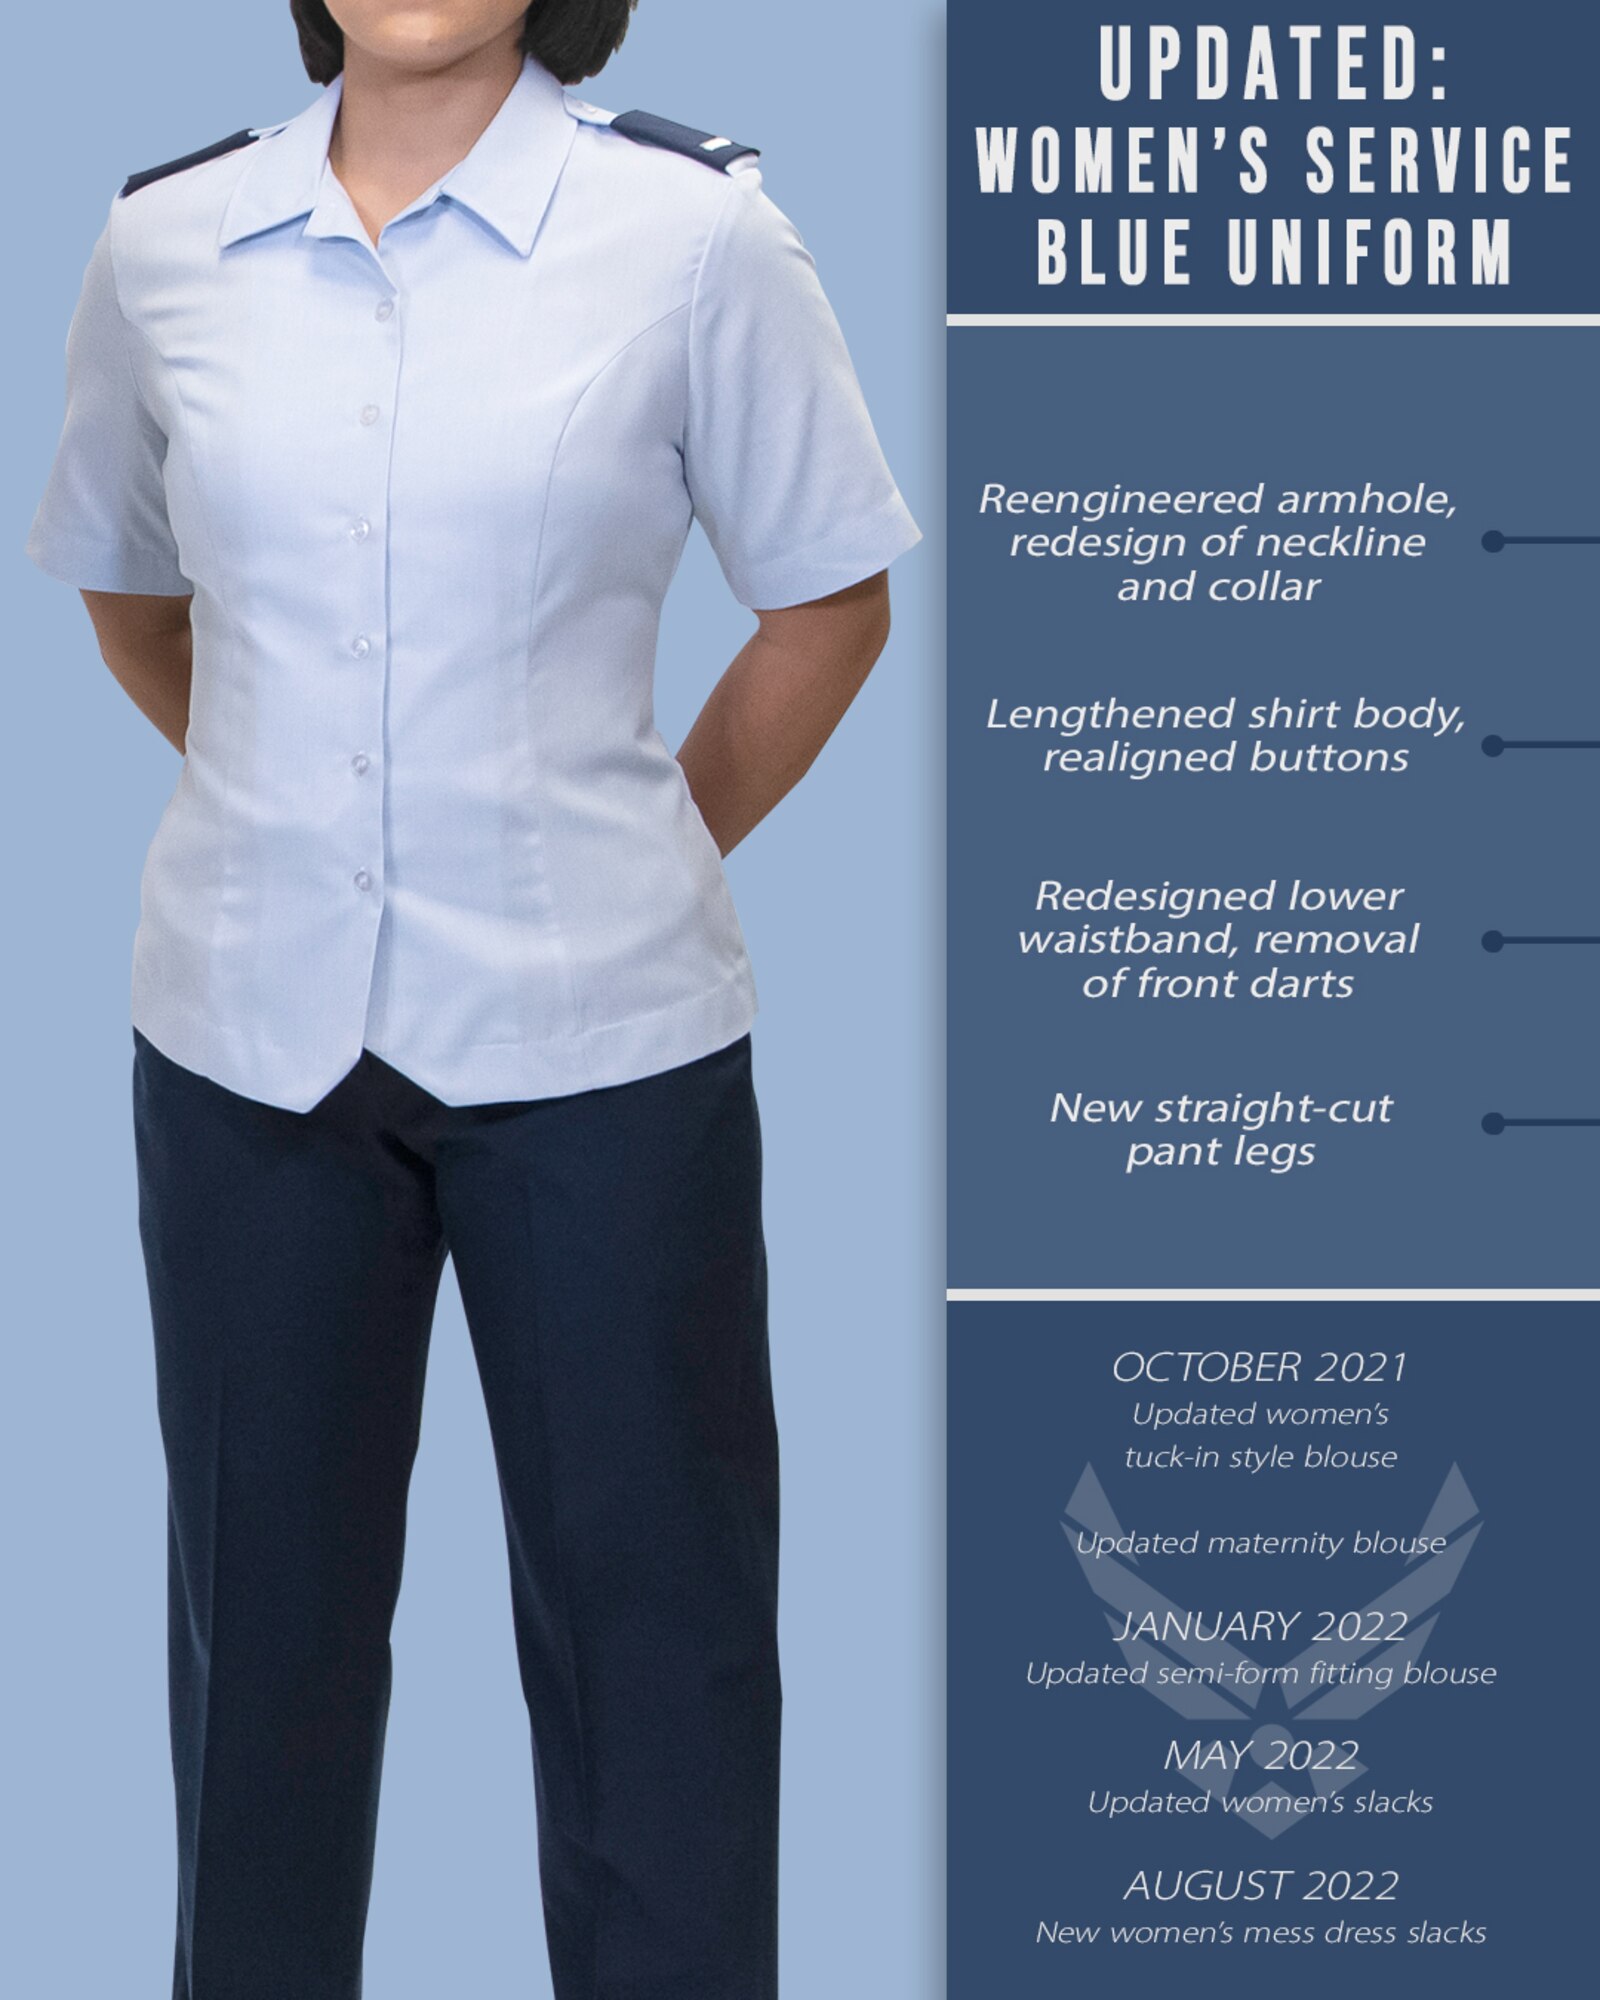 New dress and appearance changes are expected to be released in early October 2021 upon the updated publication of Air Force Instruction 36-2903, Dress and Appearance of Air Force Personnel. Changes include male bulk hair standards, cosmetic tattooing, female hair accessory size, optional hosiery in dress uniform, transparent piercing spacers and morale patches. (U.S. Air Force graphic by Staff Sgt. Elora J. McCutcheon)